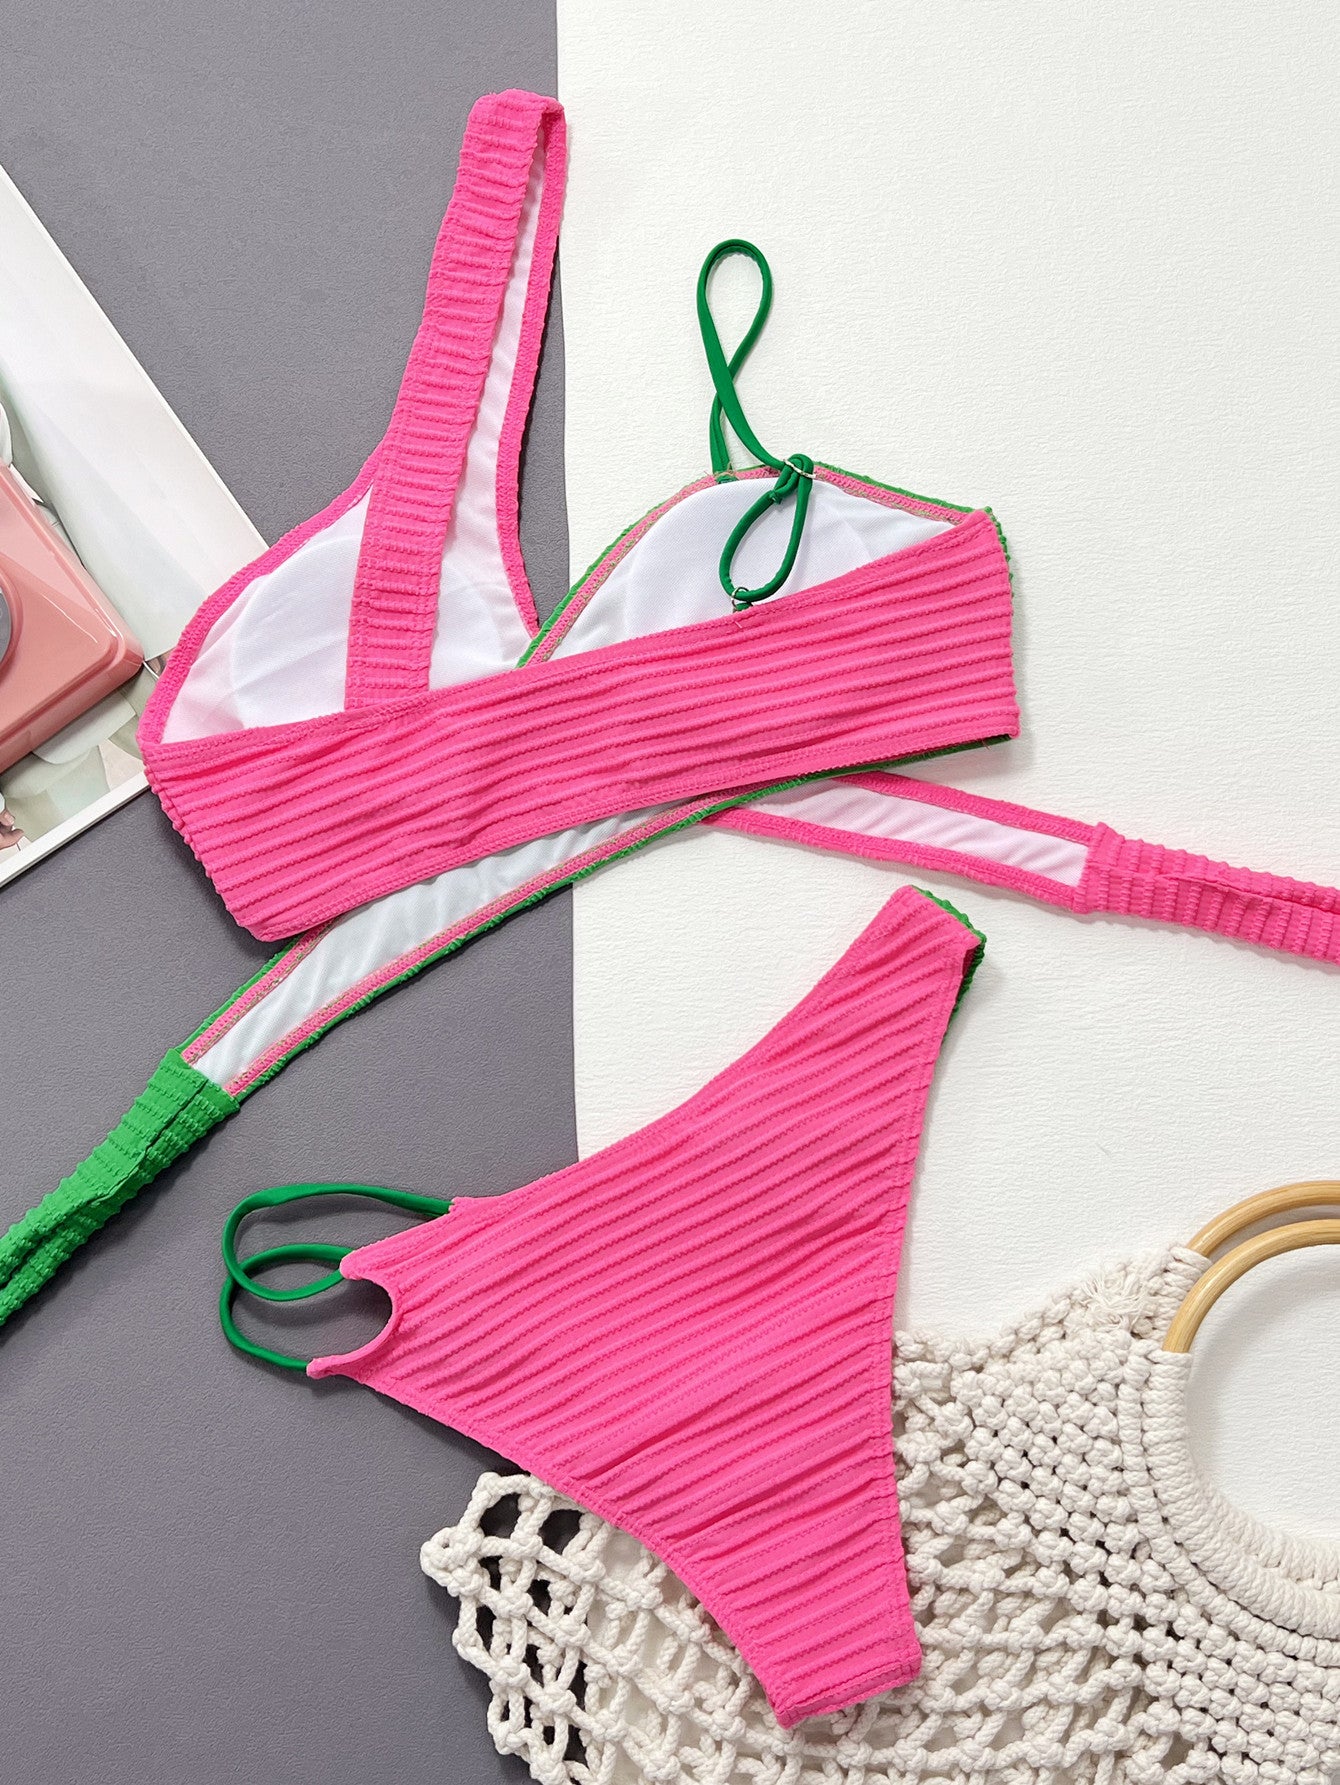 👙 Sexy Hot Pink & Green Contrasting One-Shoulder Two-Piece Swim Set 👙